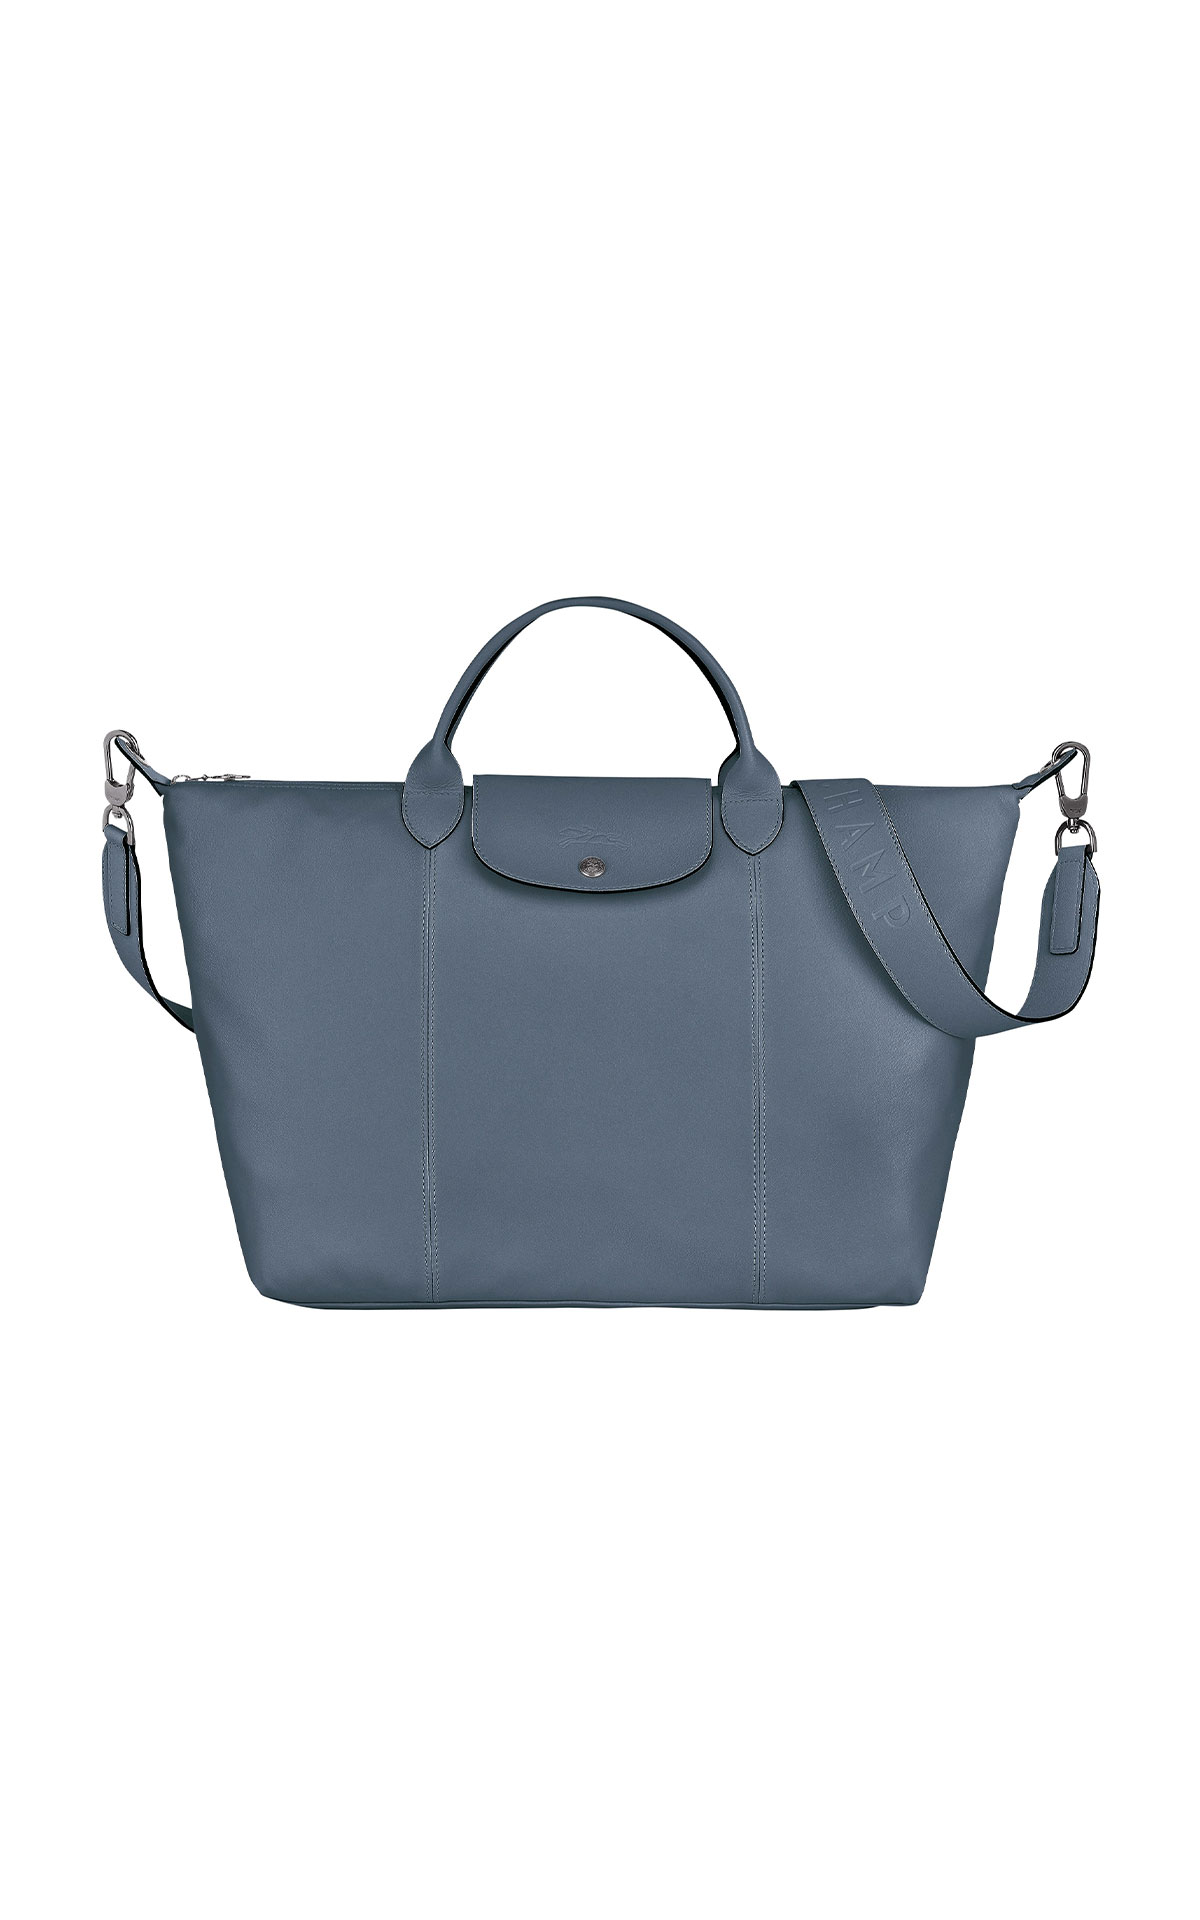 Longchamp Le pliage cuir nordic large bag with shoulder strap from Bicester Village